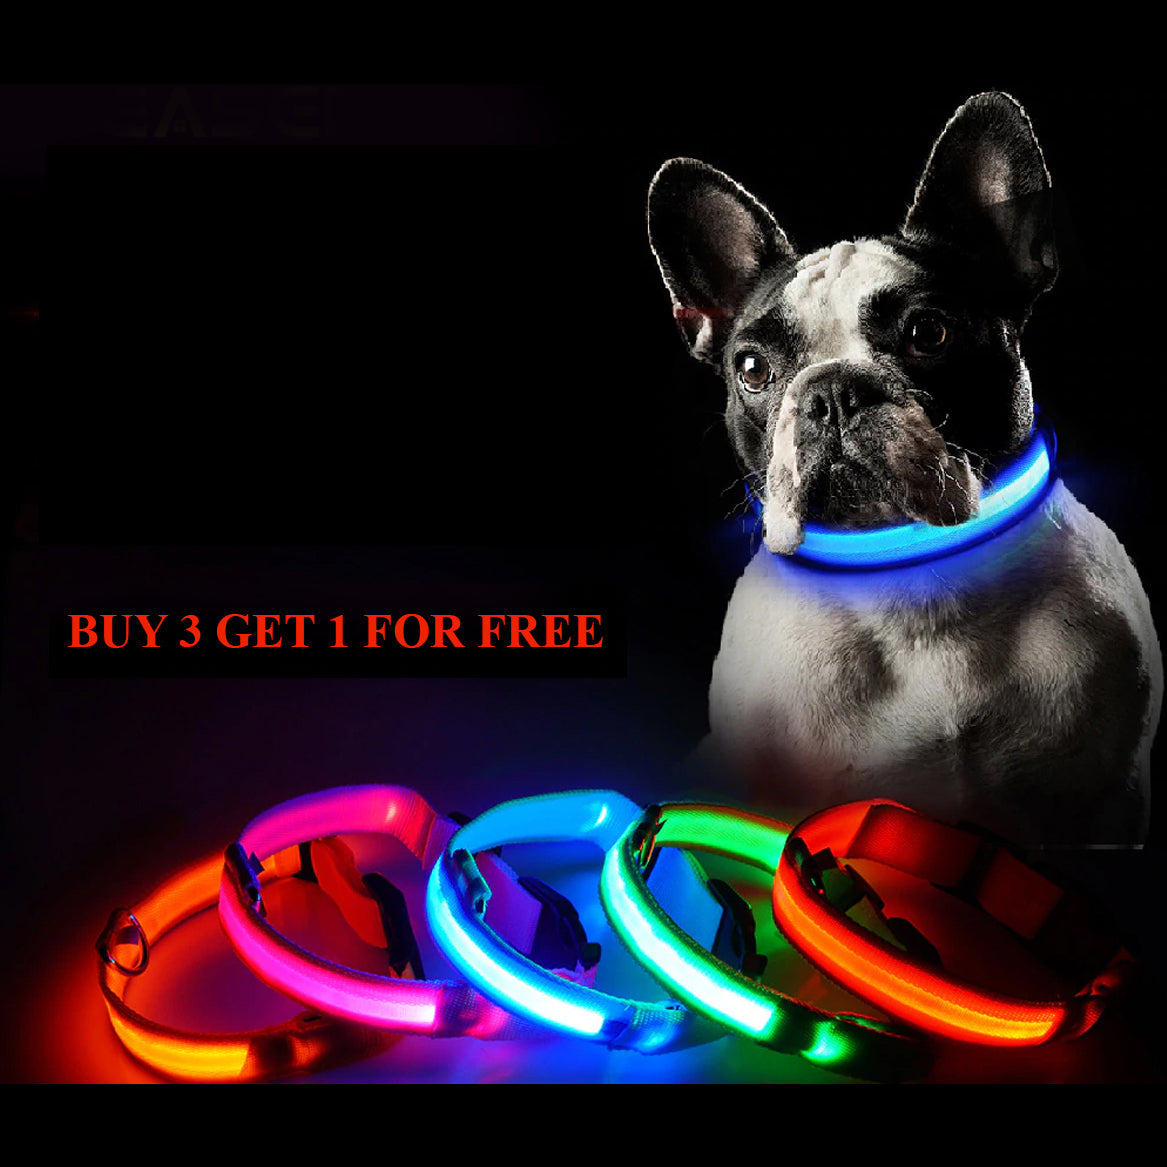 USB Charging LED Pet Collar Anti-Lost/Avoid Car Accident Safety Collar For Dogs/cats